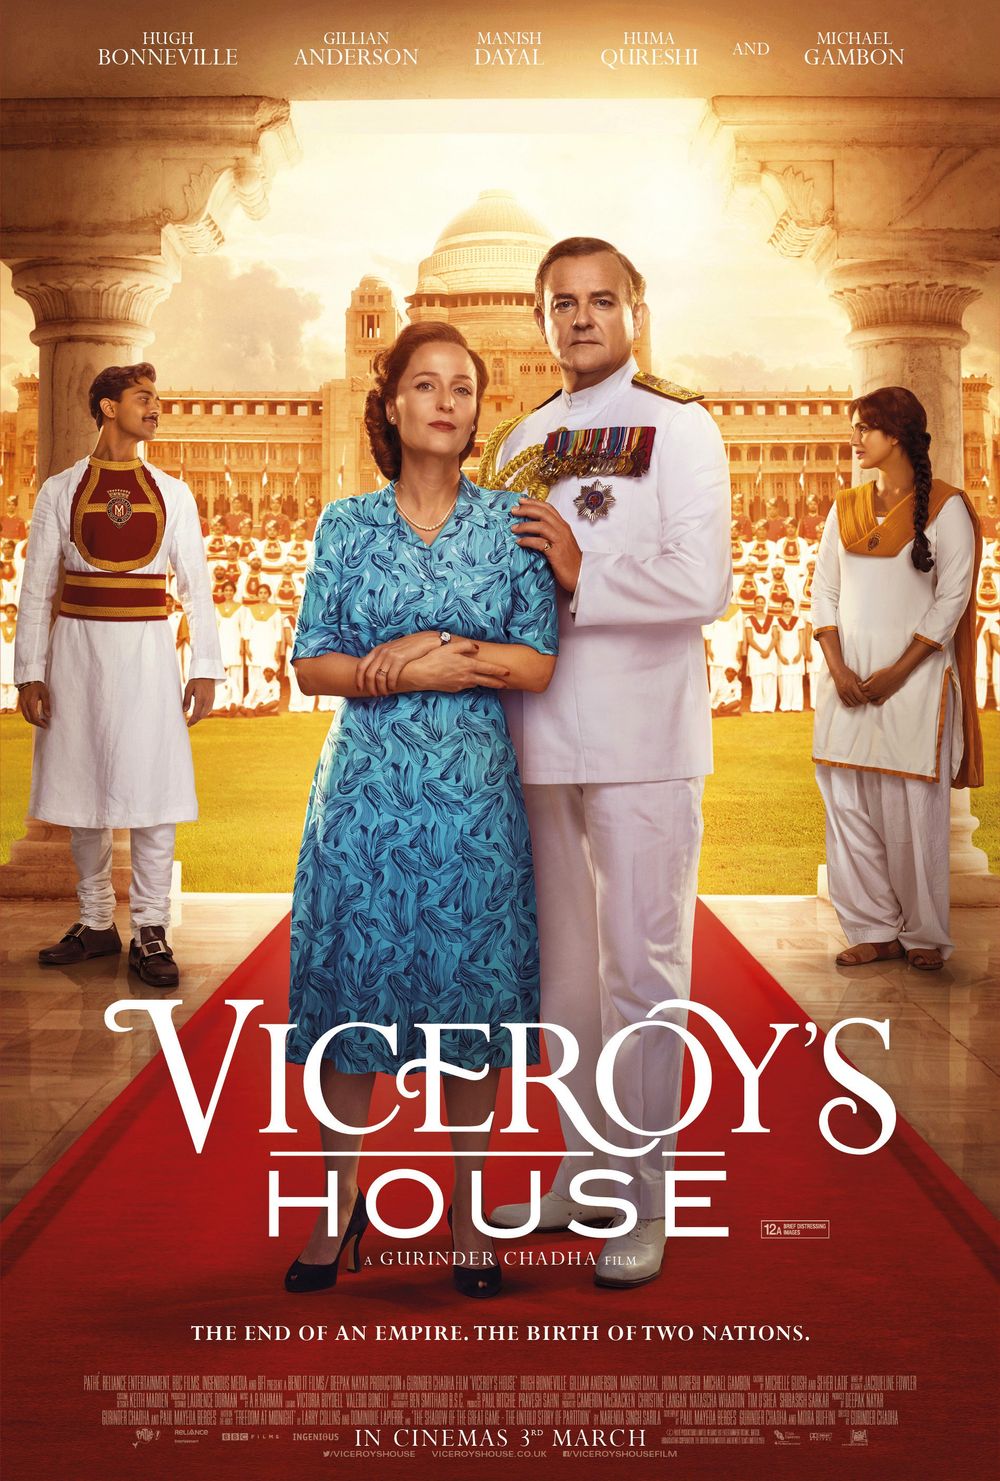 Viceroy's House Movie Review